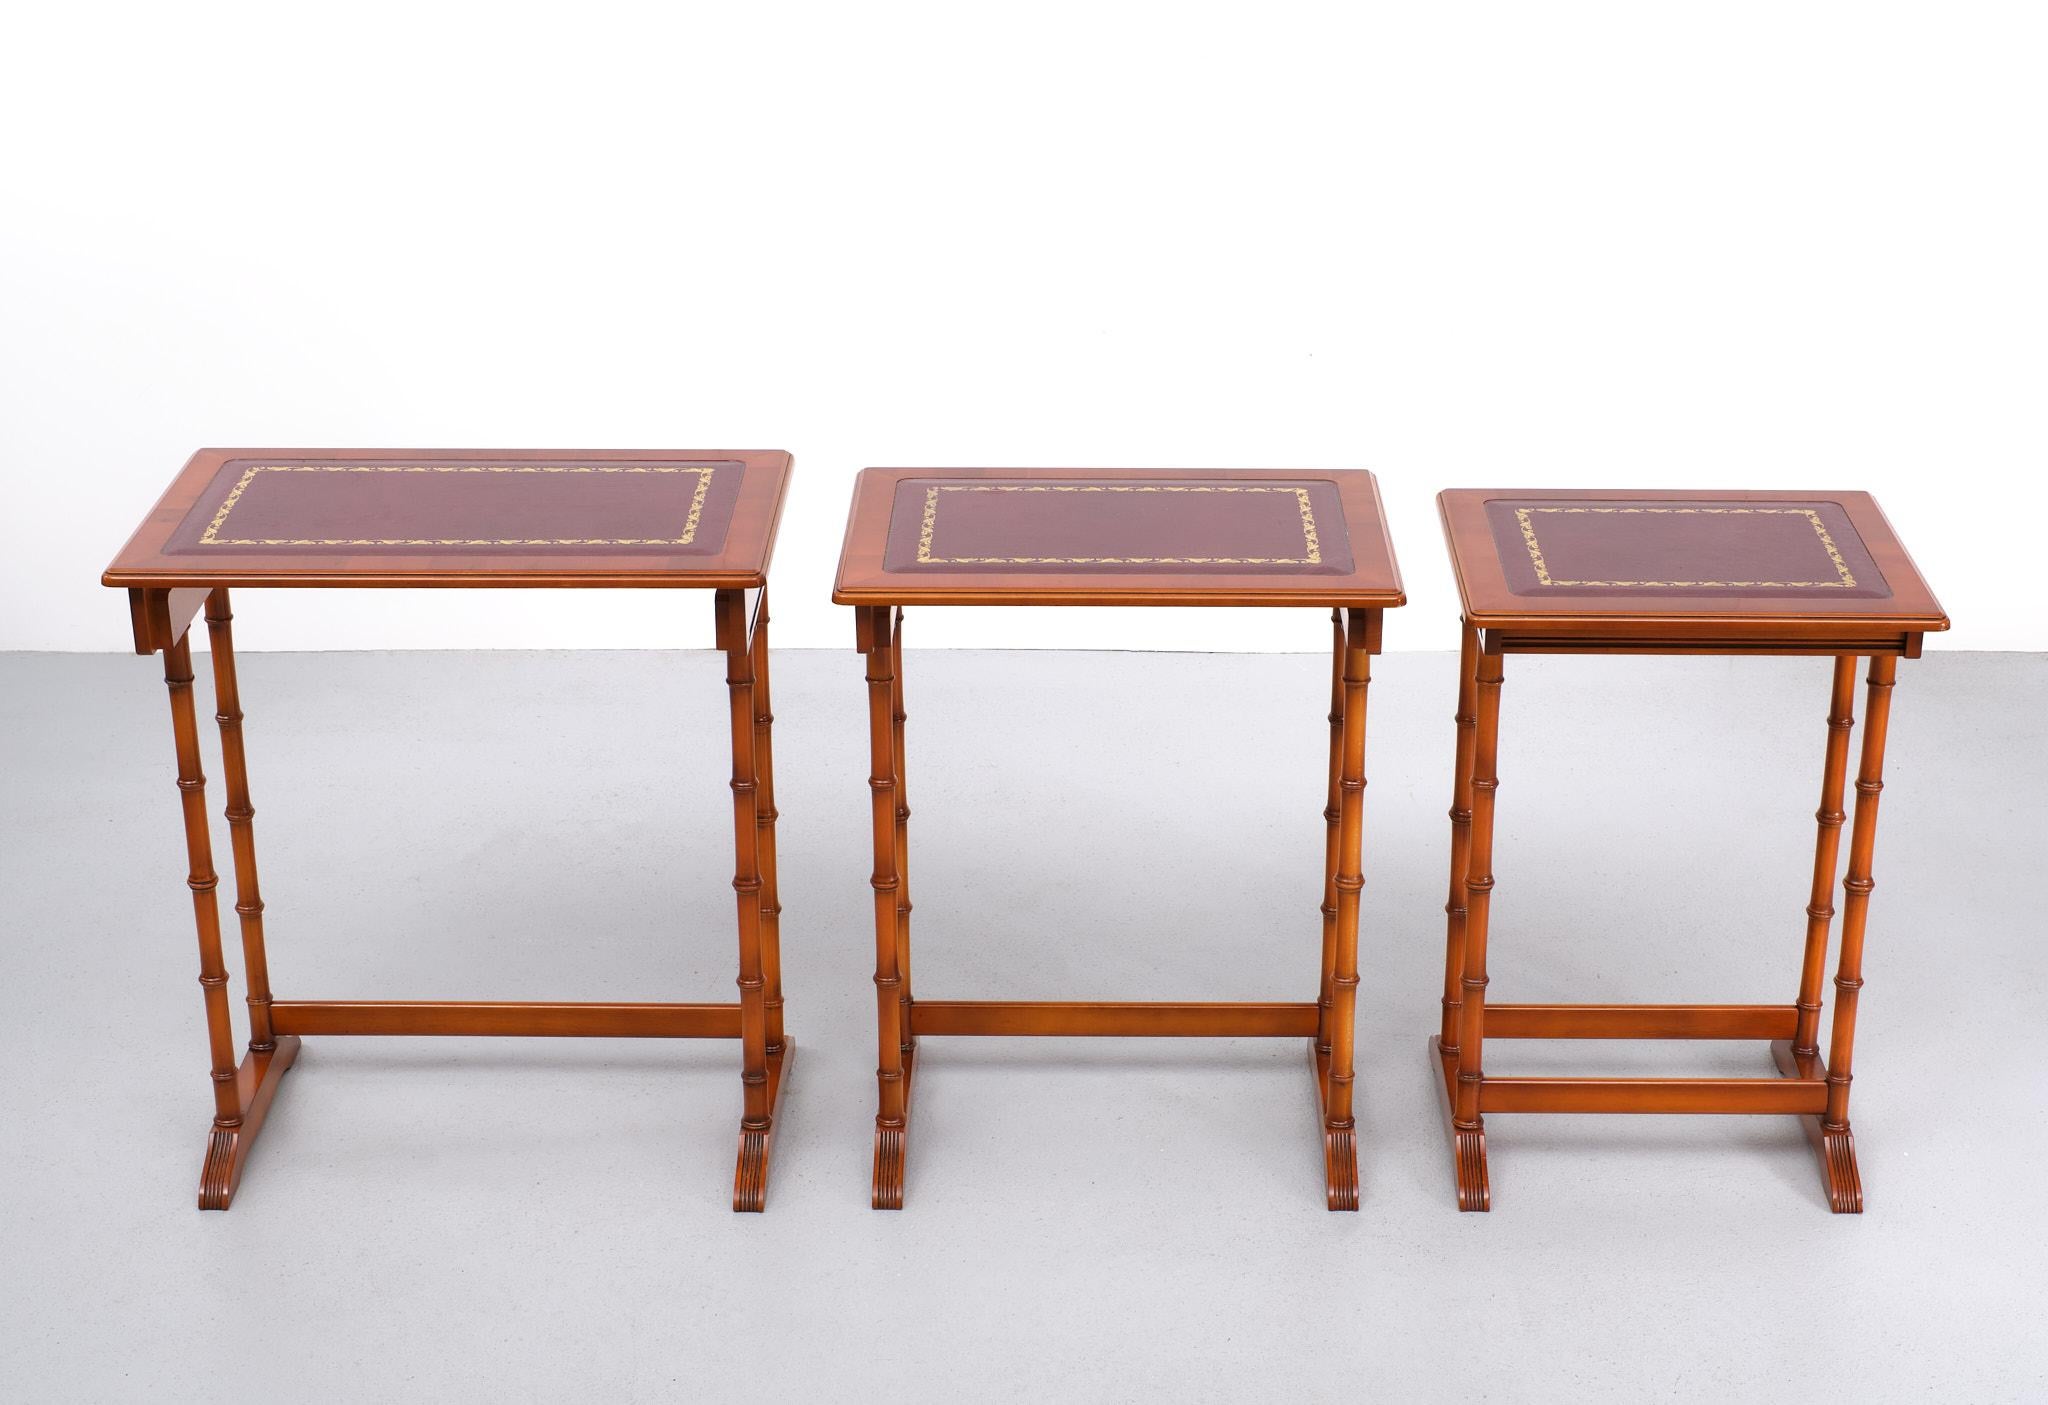   Exclusive English furniture  Cherry wood nesting tables  1970s  For Sale 6